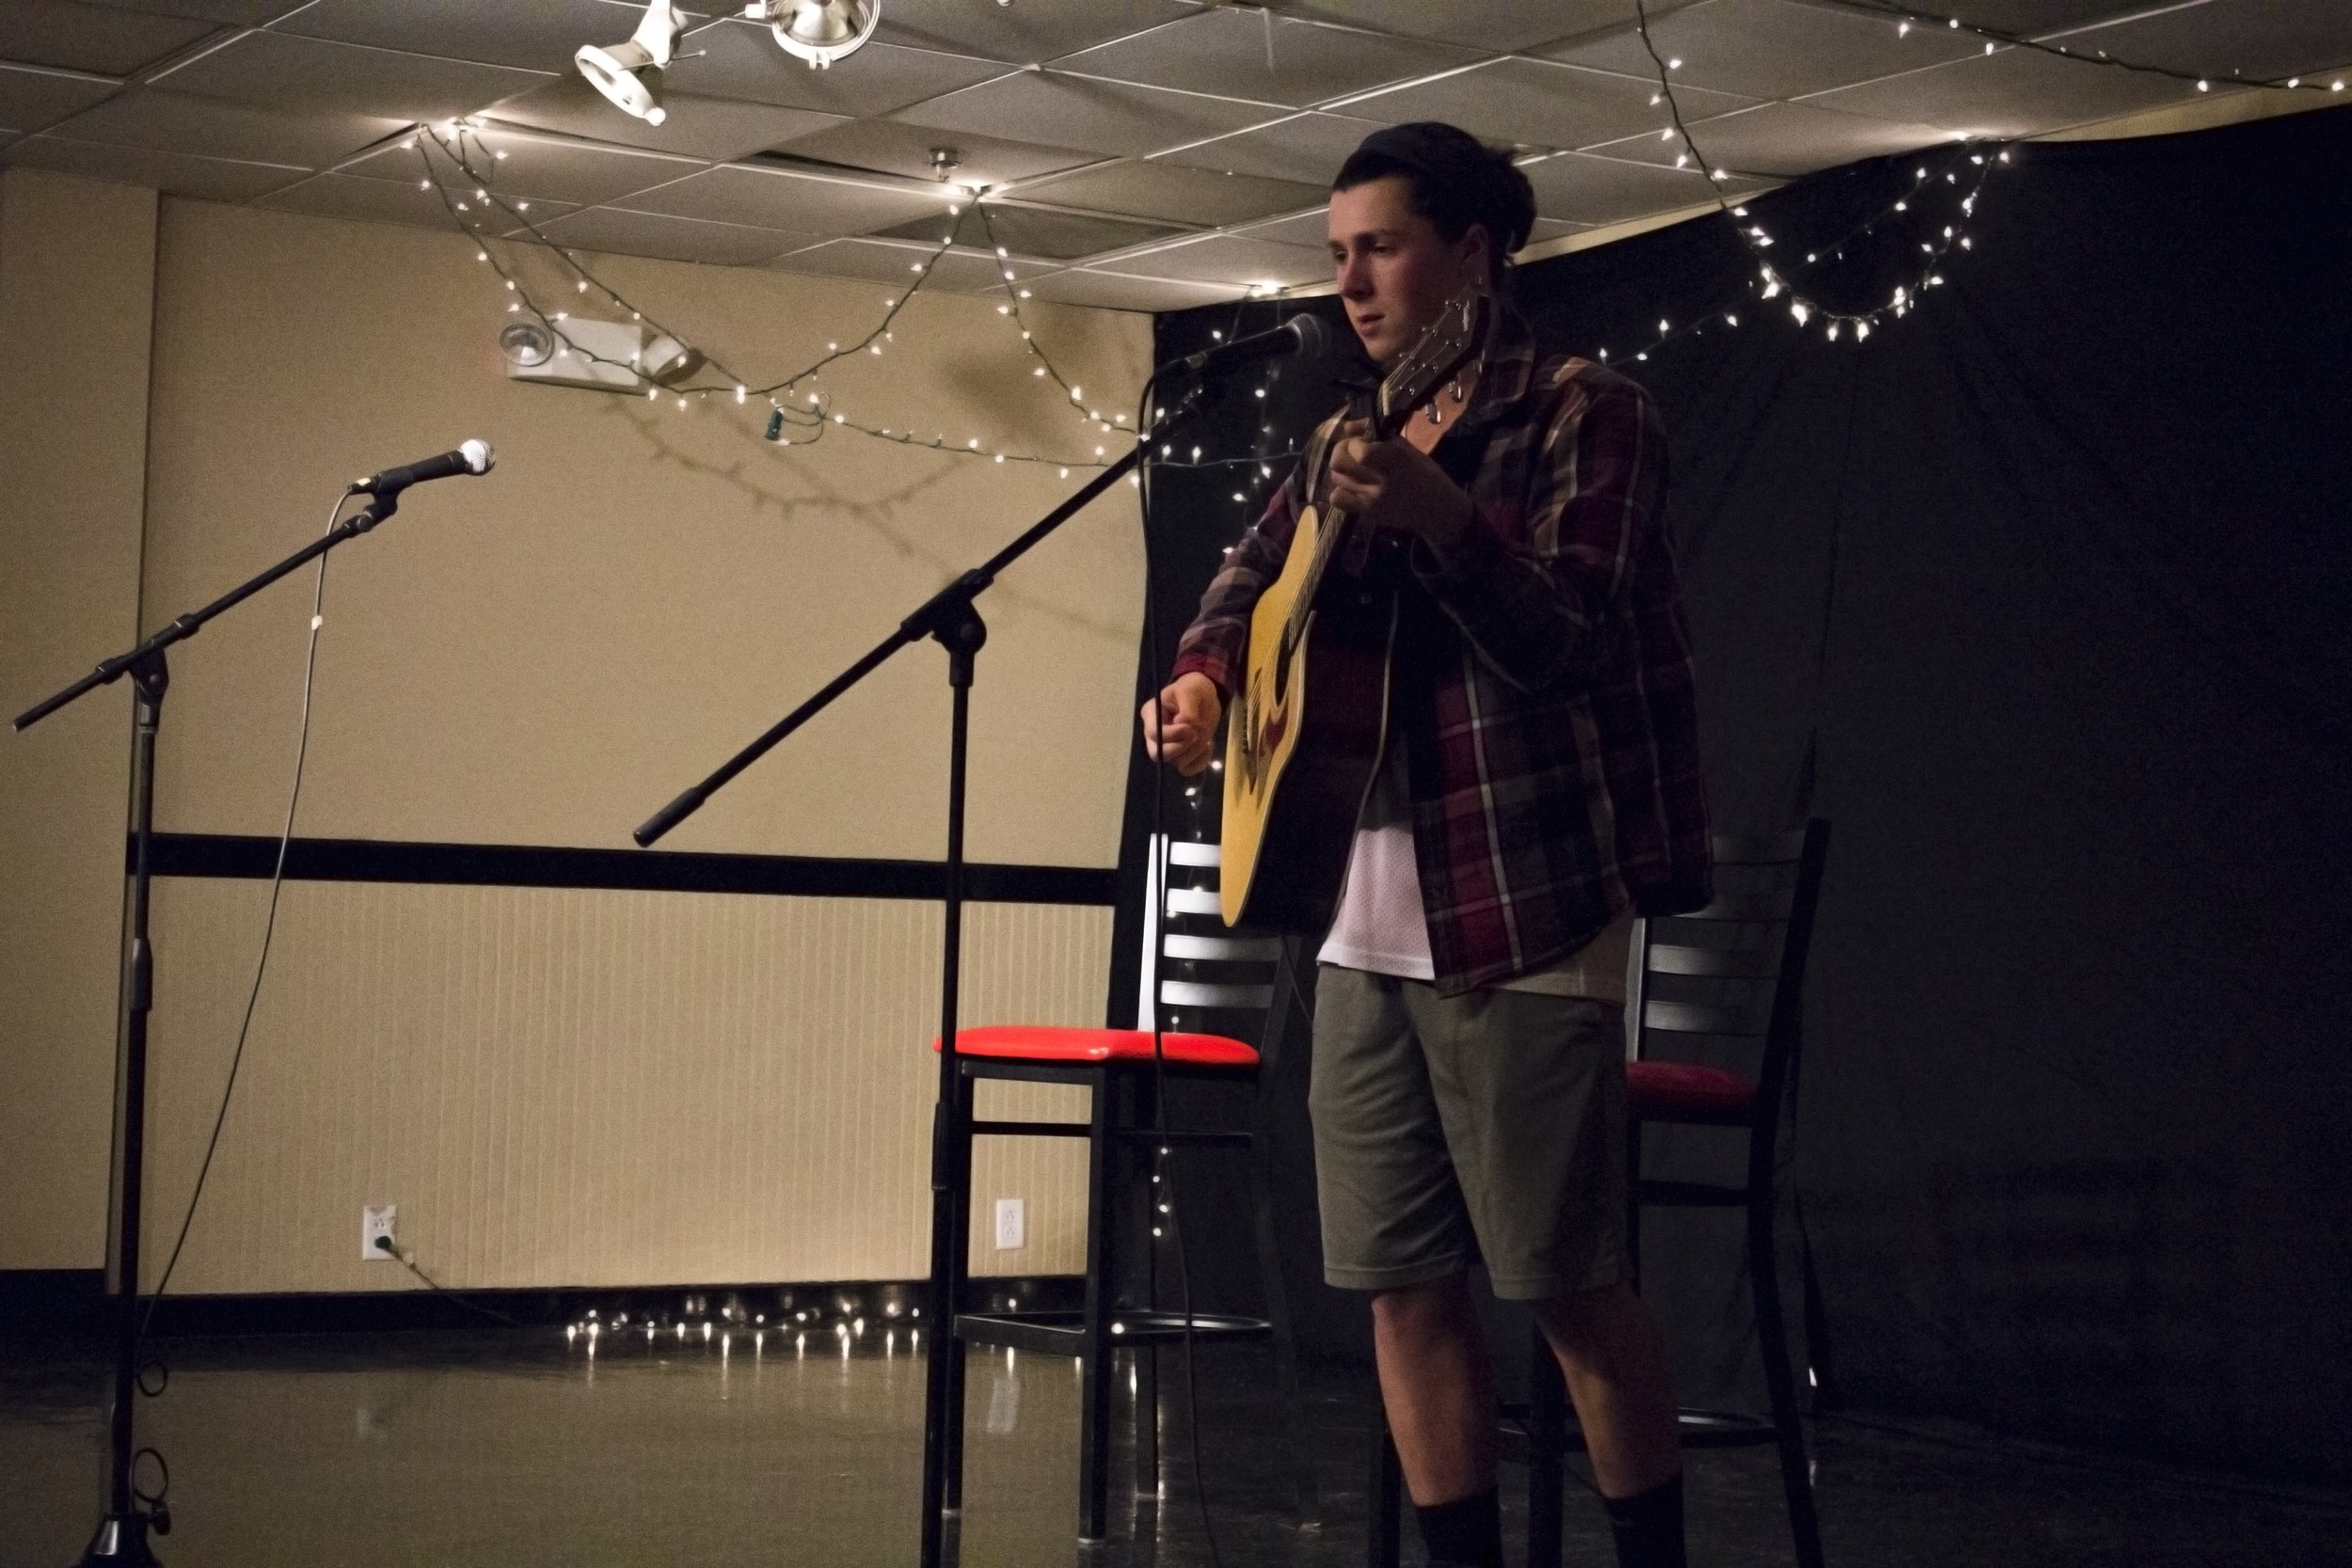  Josh Sandifer opens the night with some tunes from his melodious guitar and voice.&nbsp;&nbsp; 